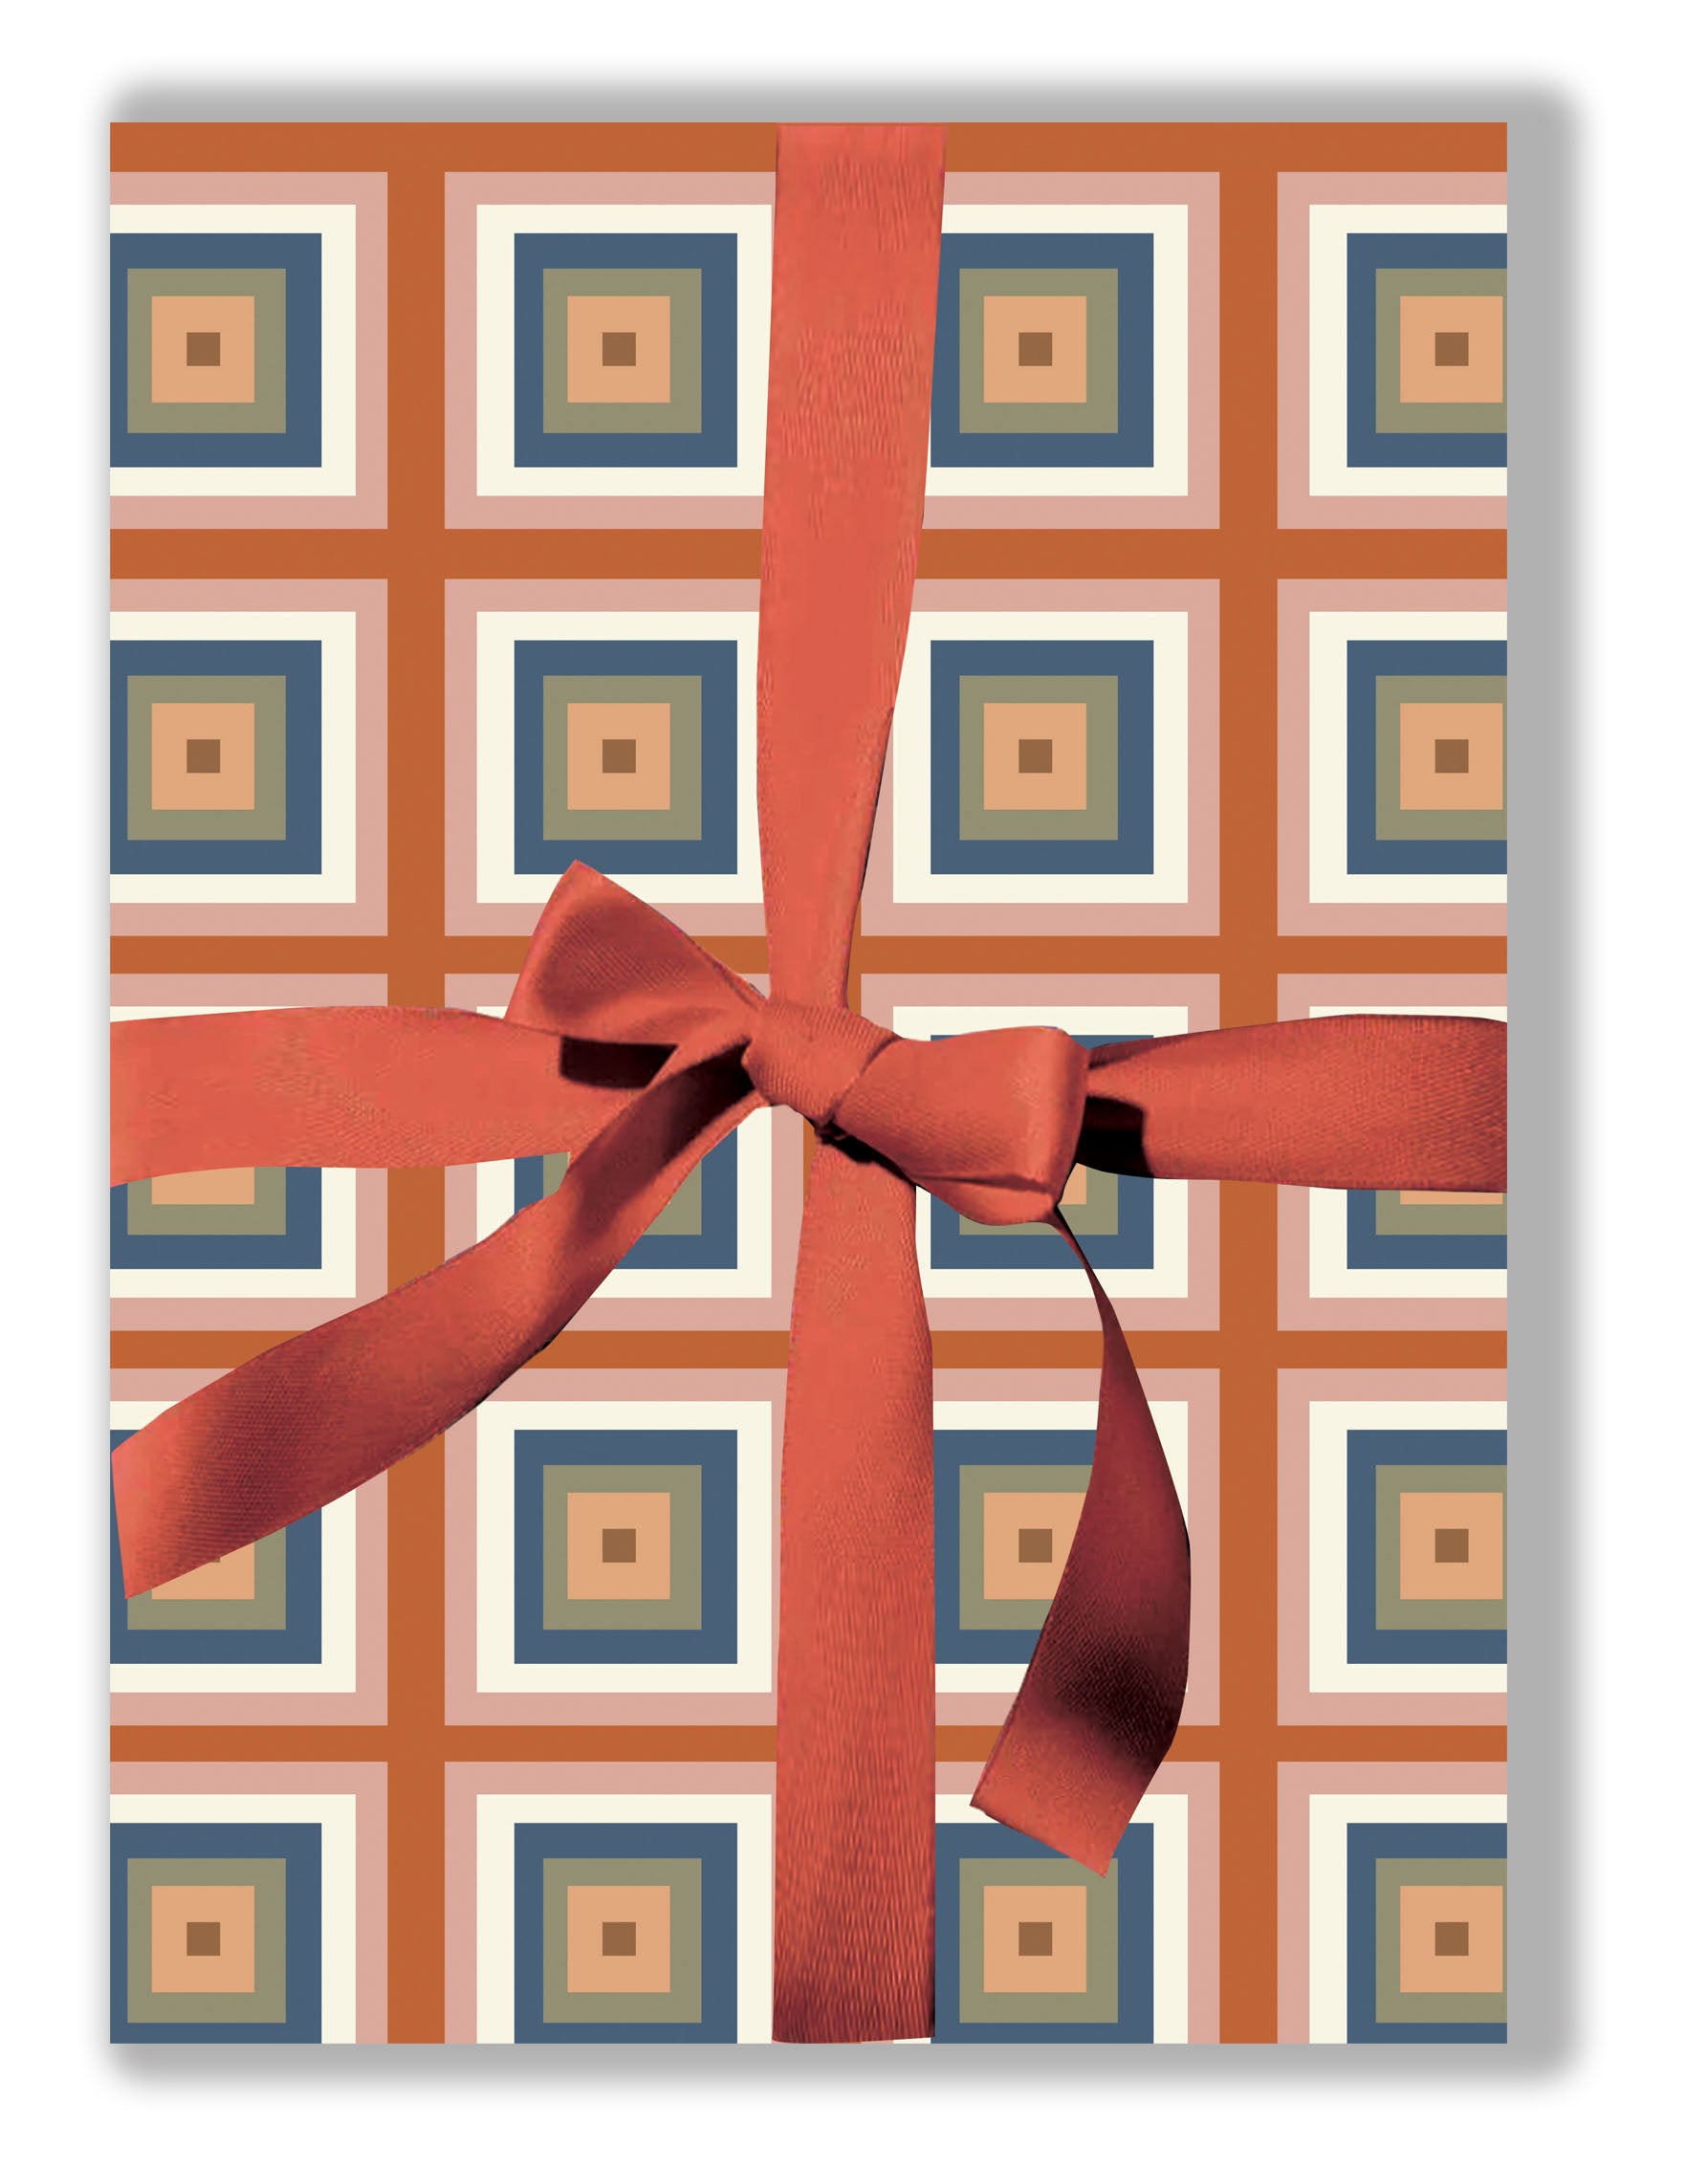 Squaresville wrapping paper